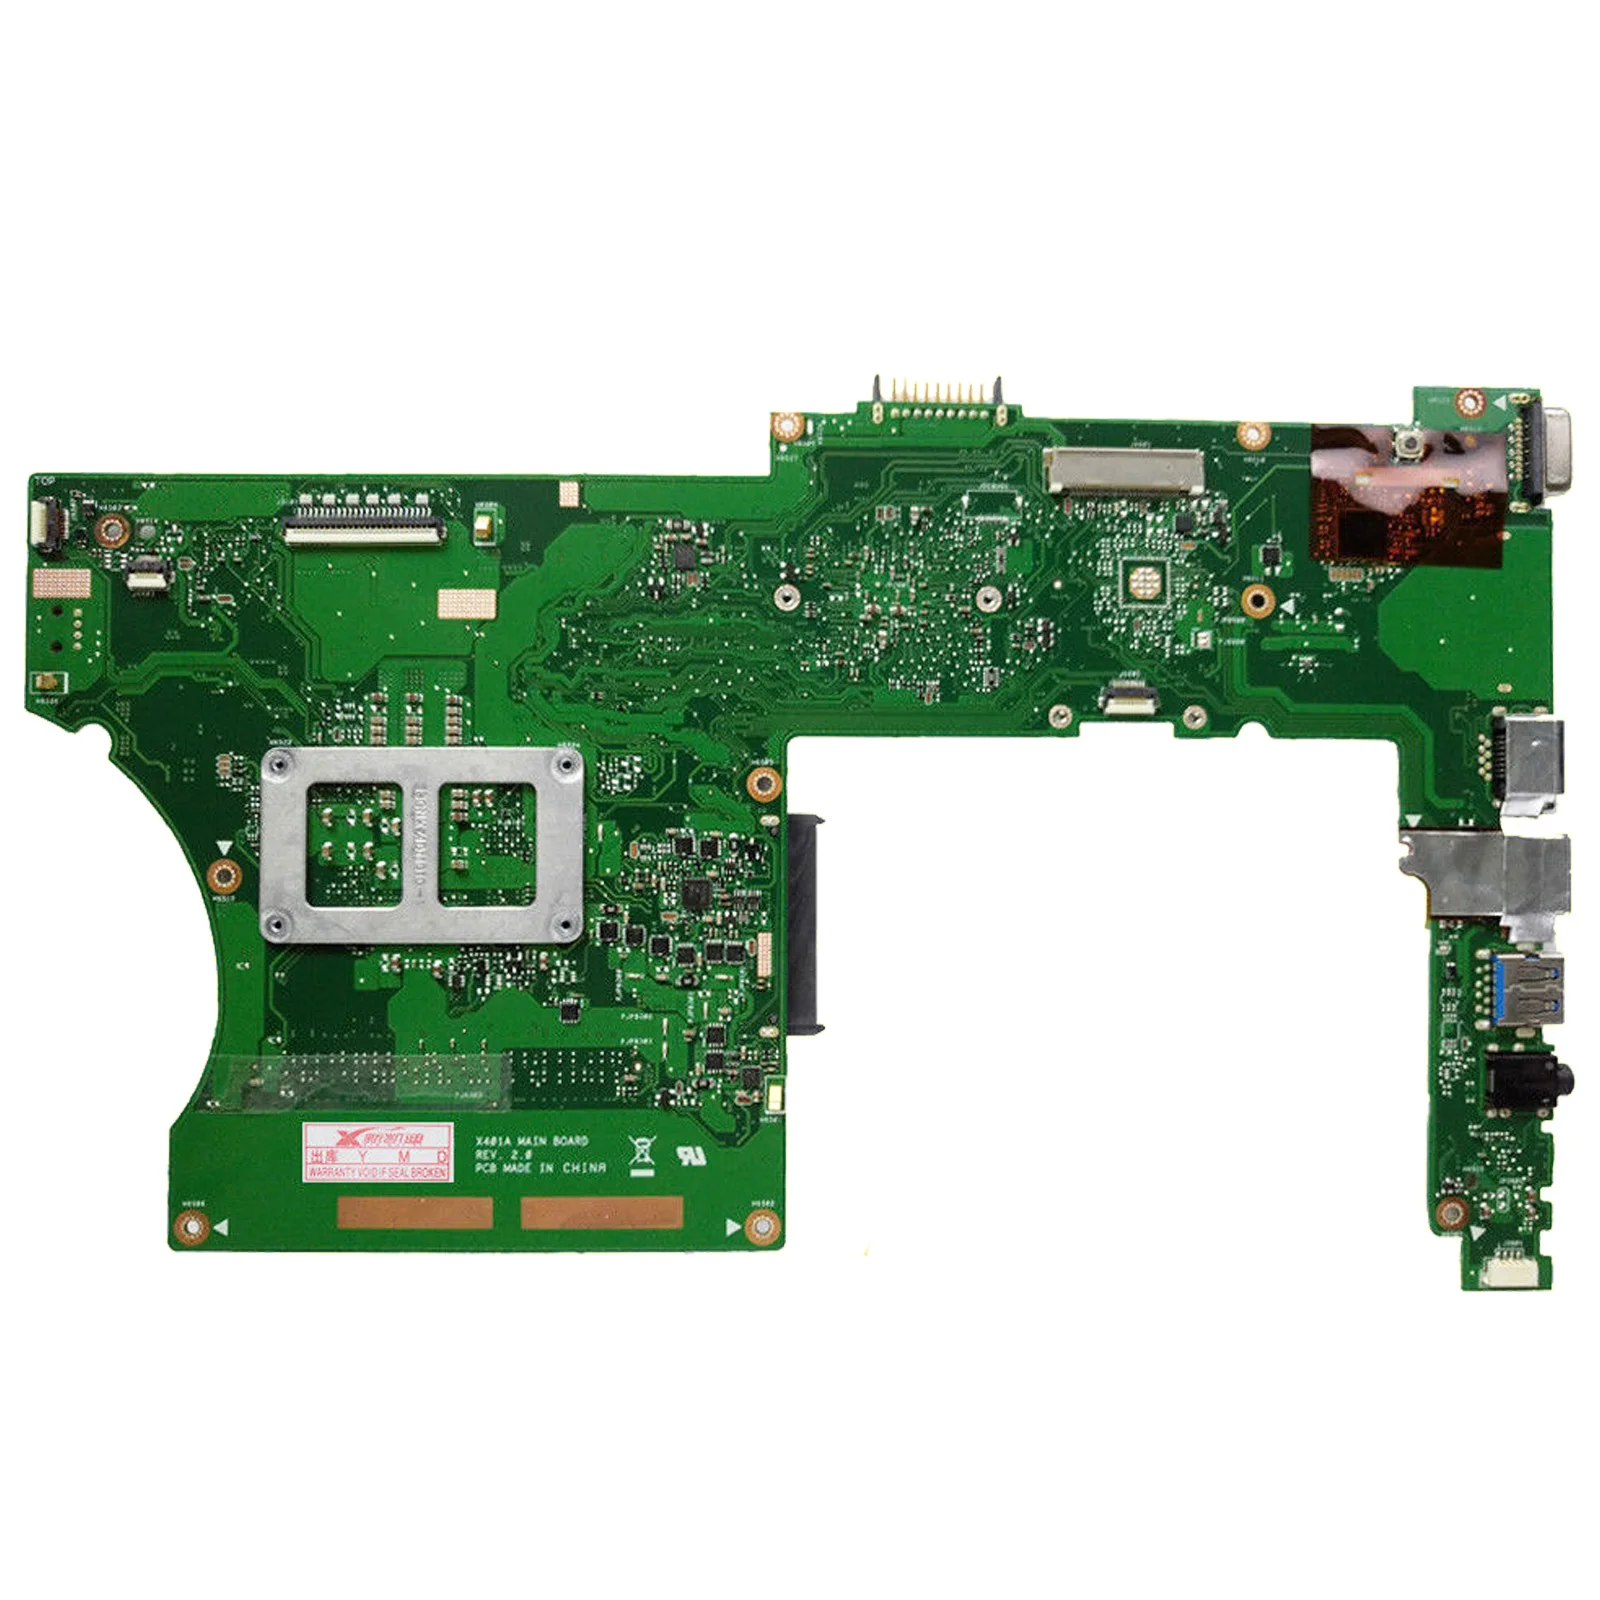 

Mainboard For ASUS X301A X401A X501A Laptop Motherboard CPU i3 SLJ8E HM76 DDR3